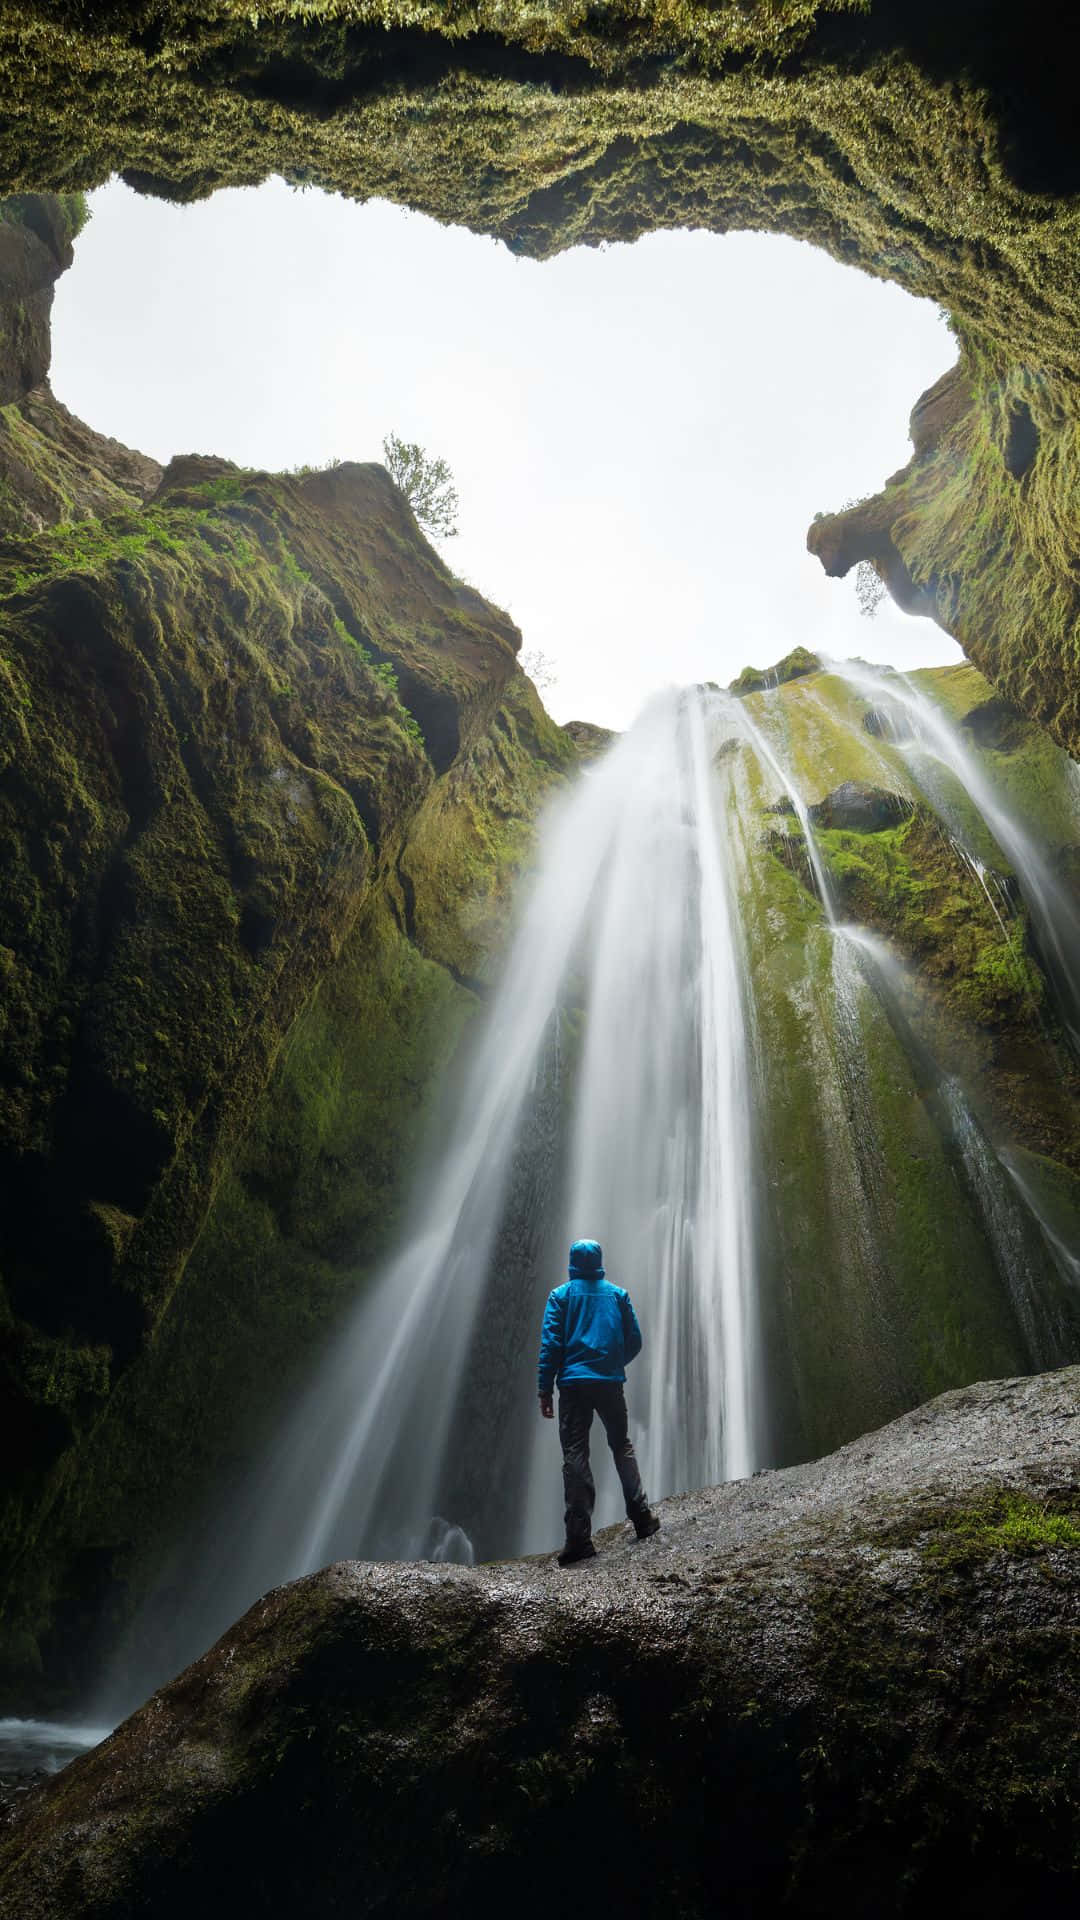 Join the adventurous journey in Iceland